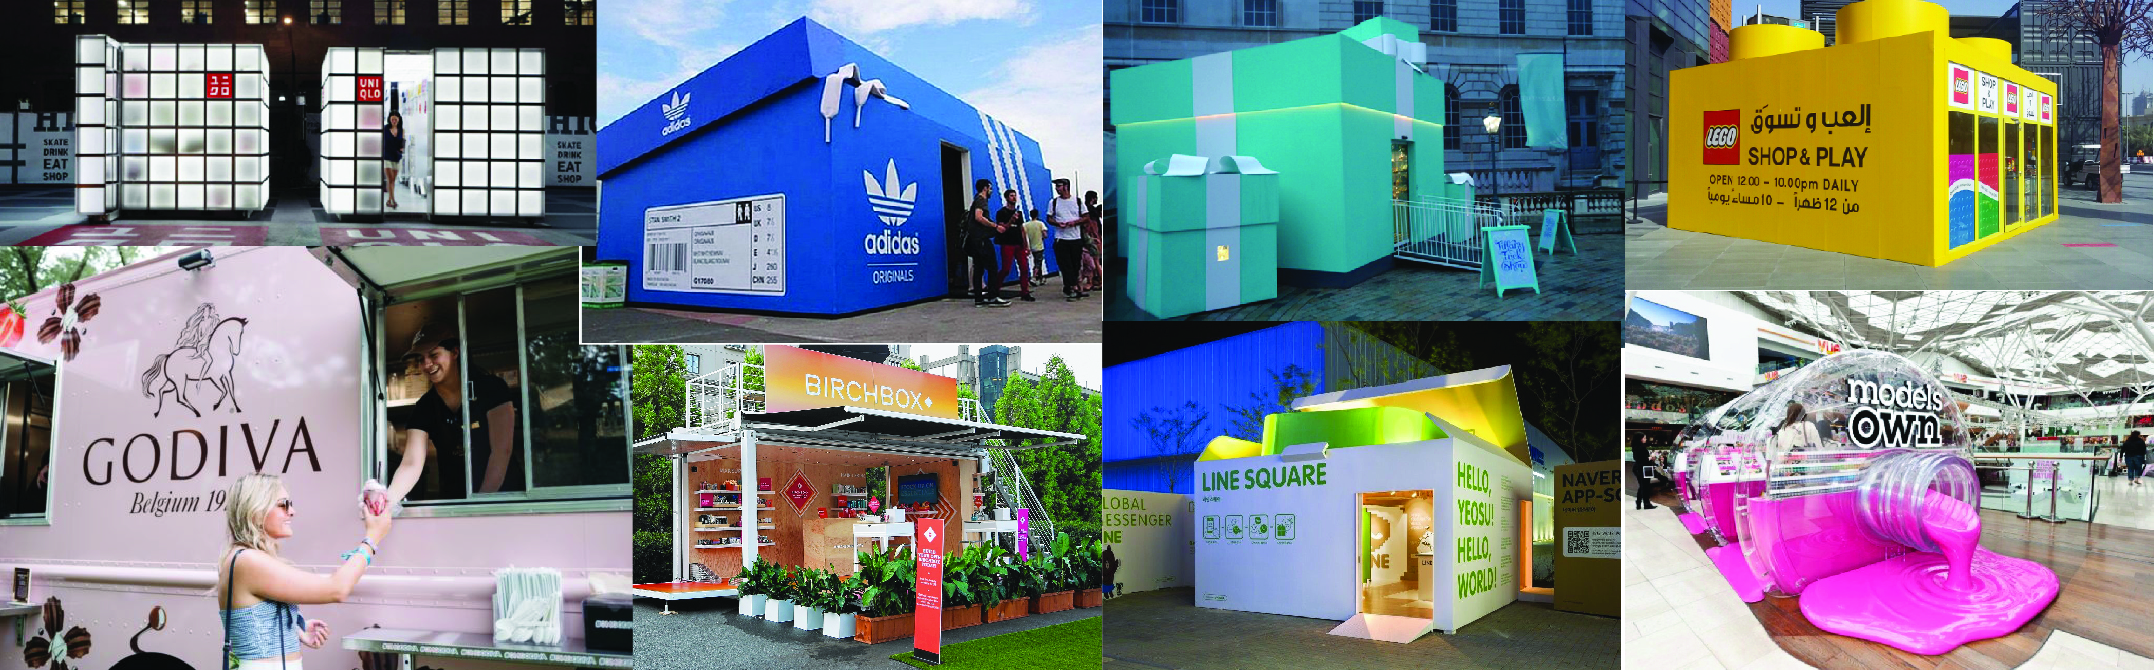 ~ side mode Banquet Pop-up Shops Become Part of Retailers' Core Strategy